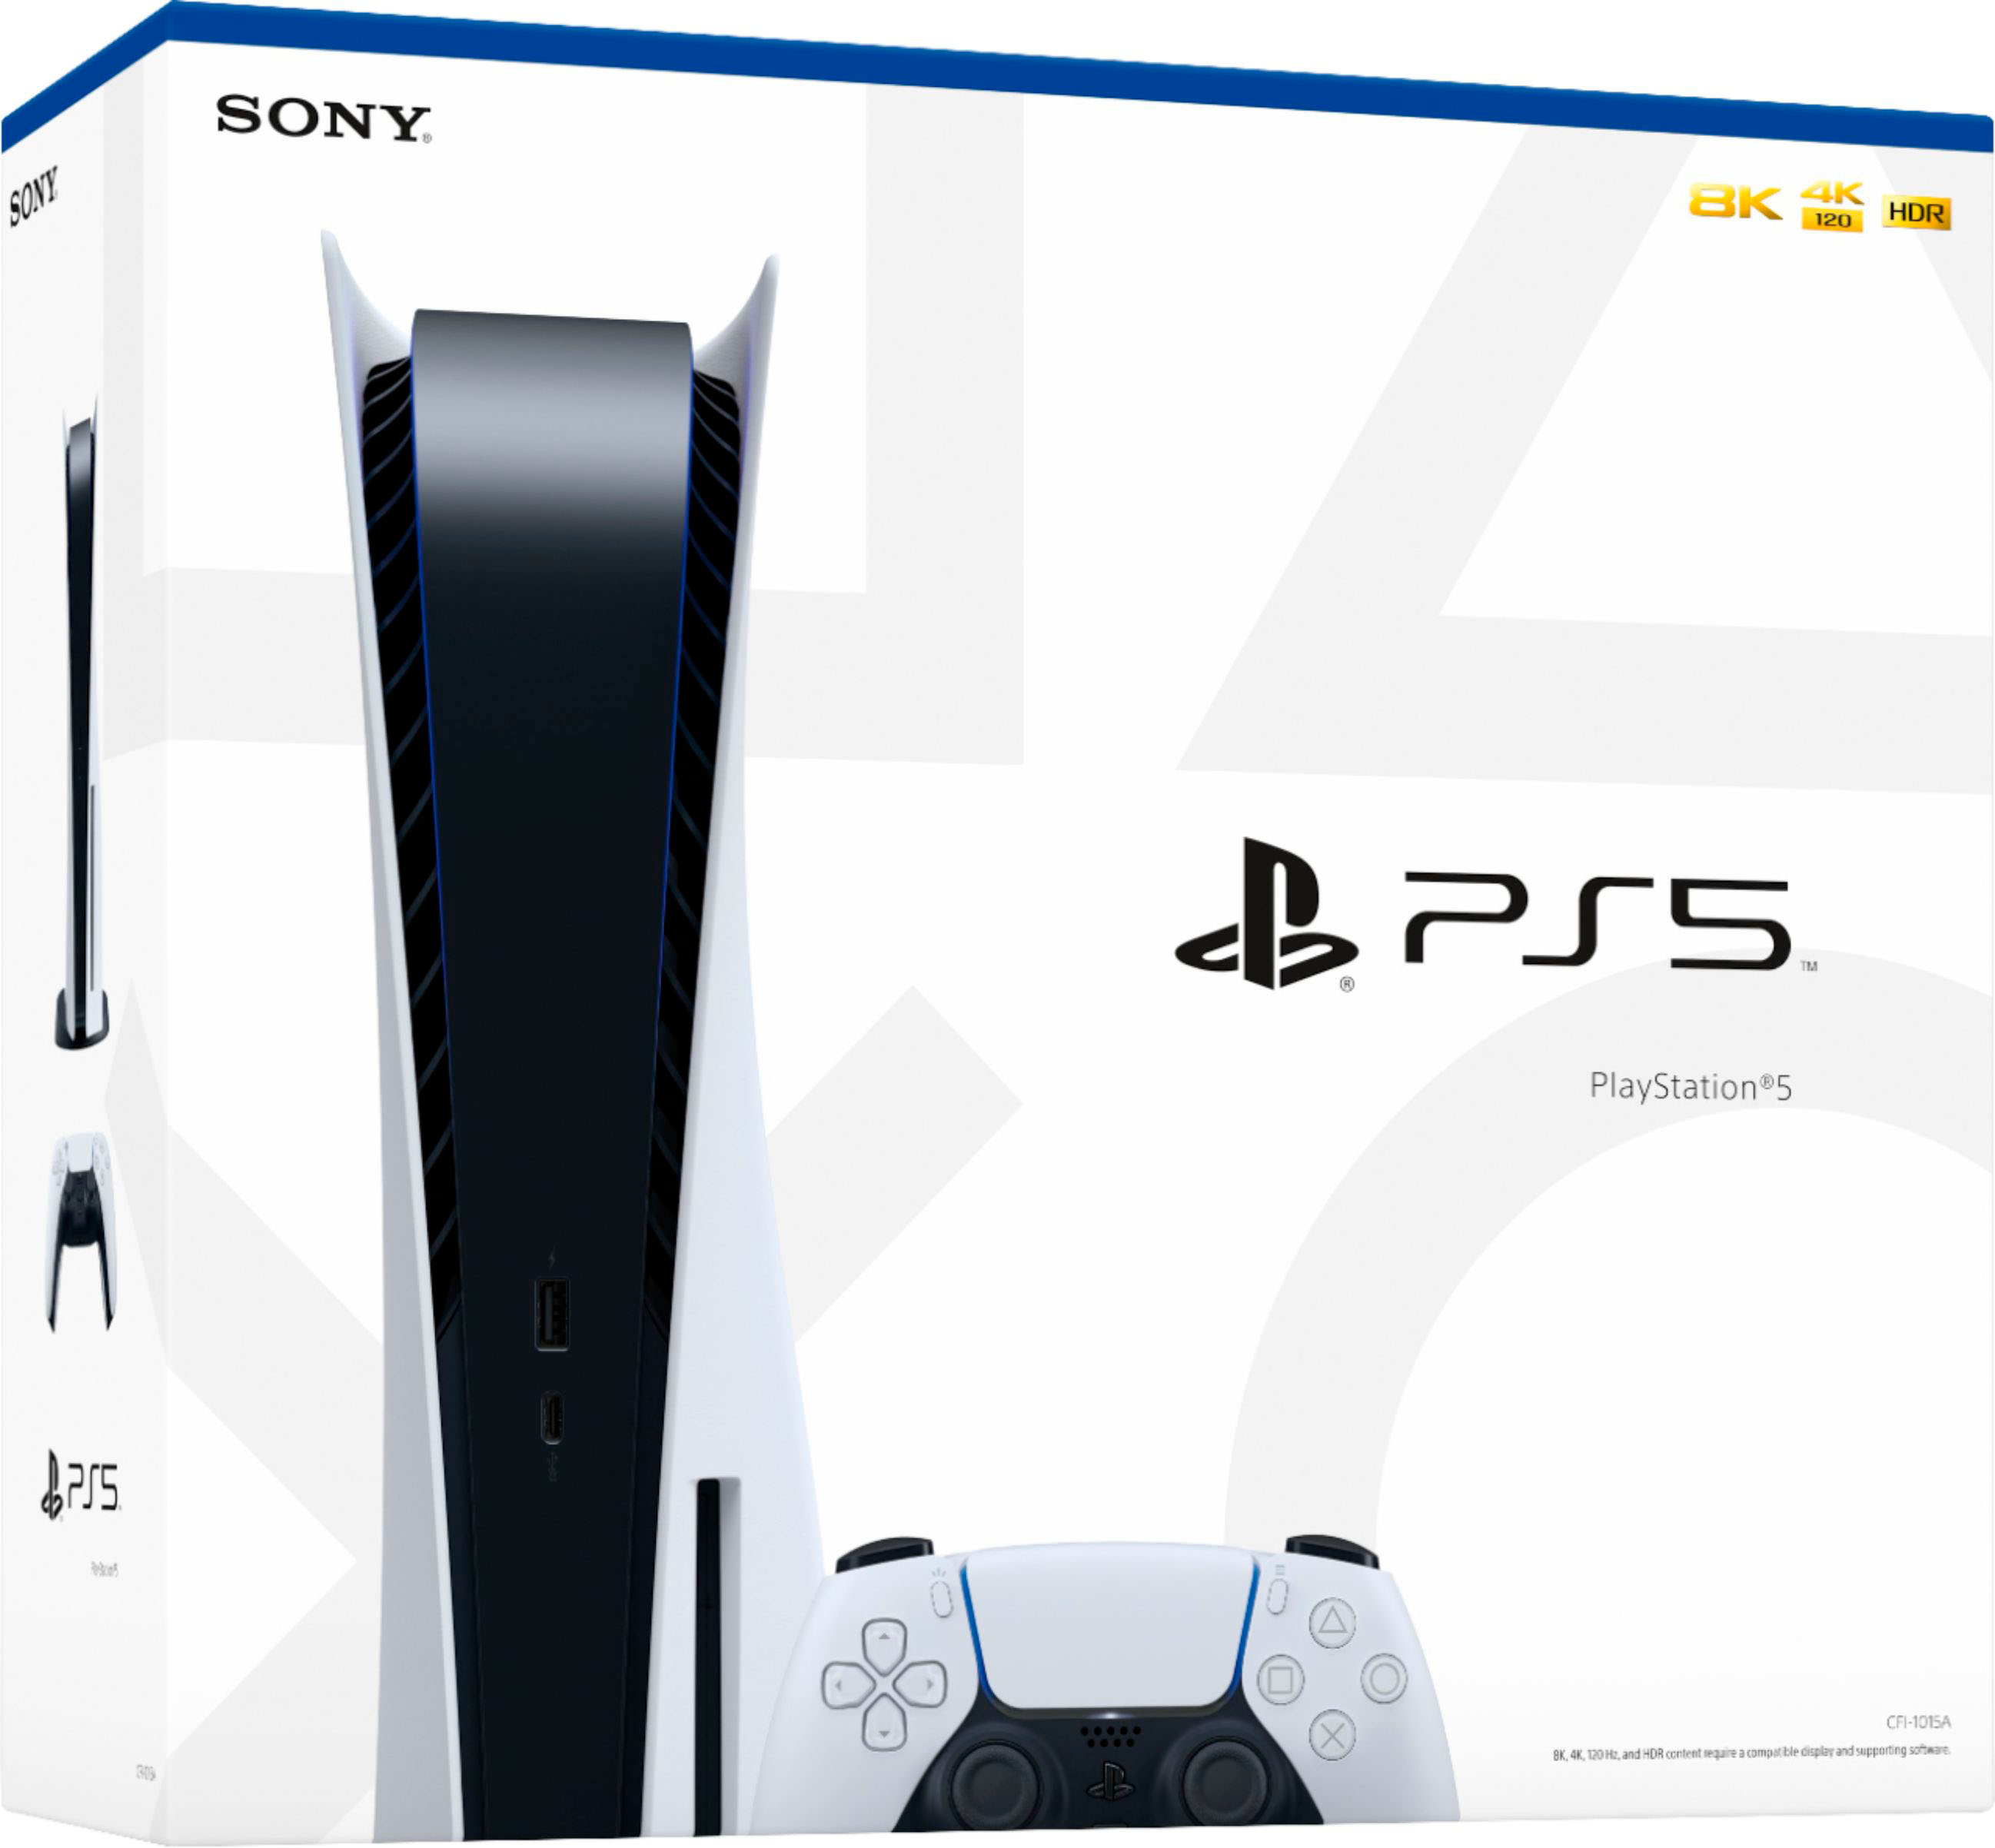 what's the price of playstation 5